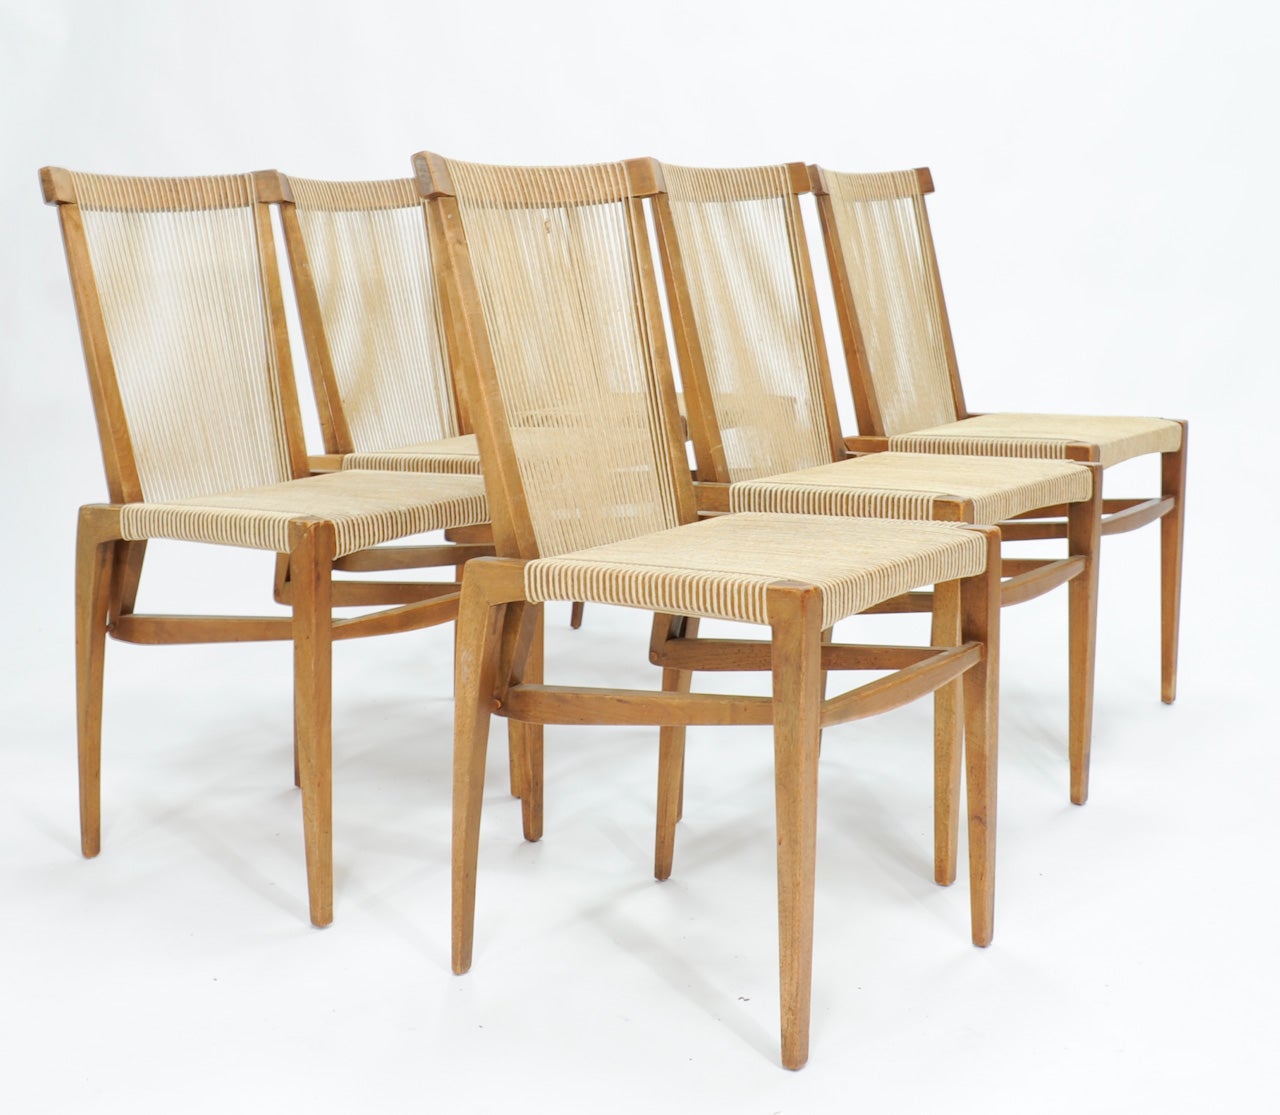 1953 Irving Sabo String Dining Chairs for J.G. Johnson Furniture Company For Sale